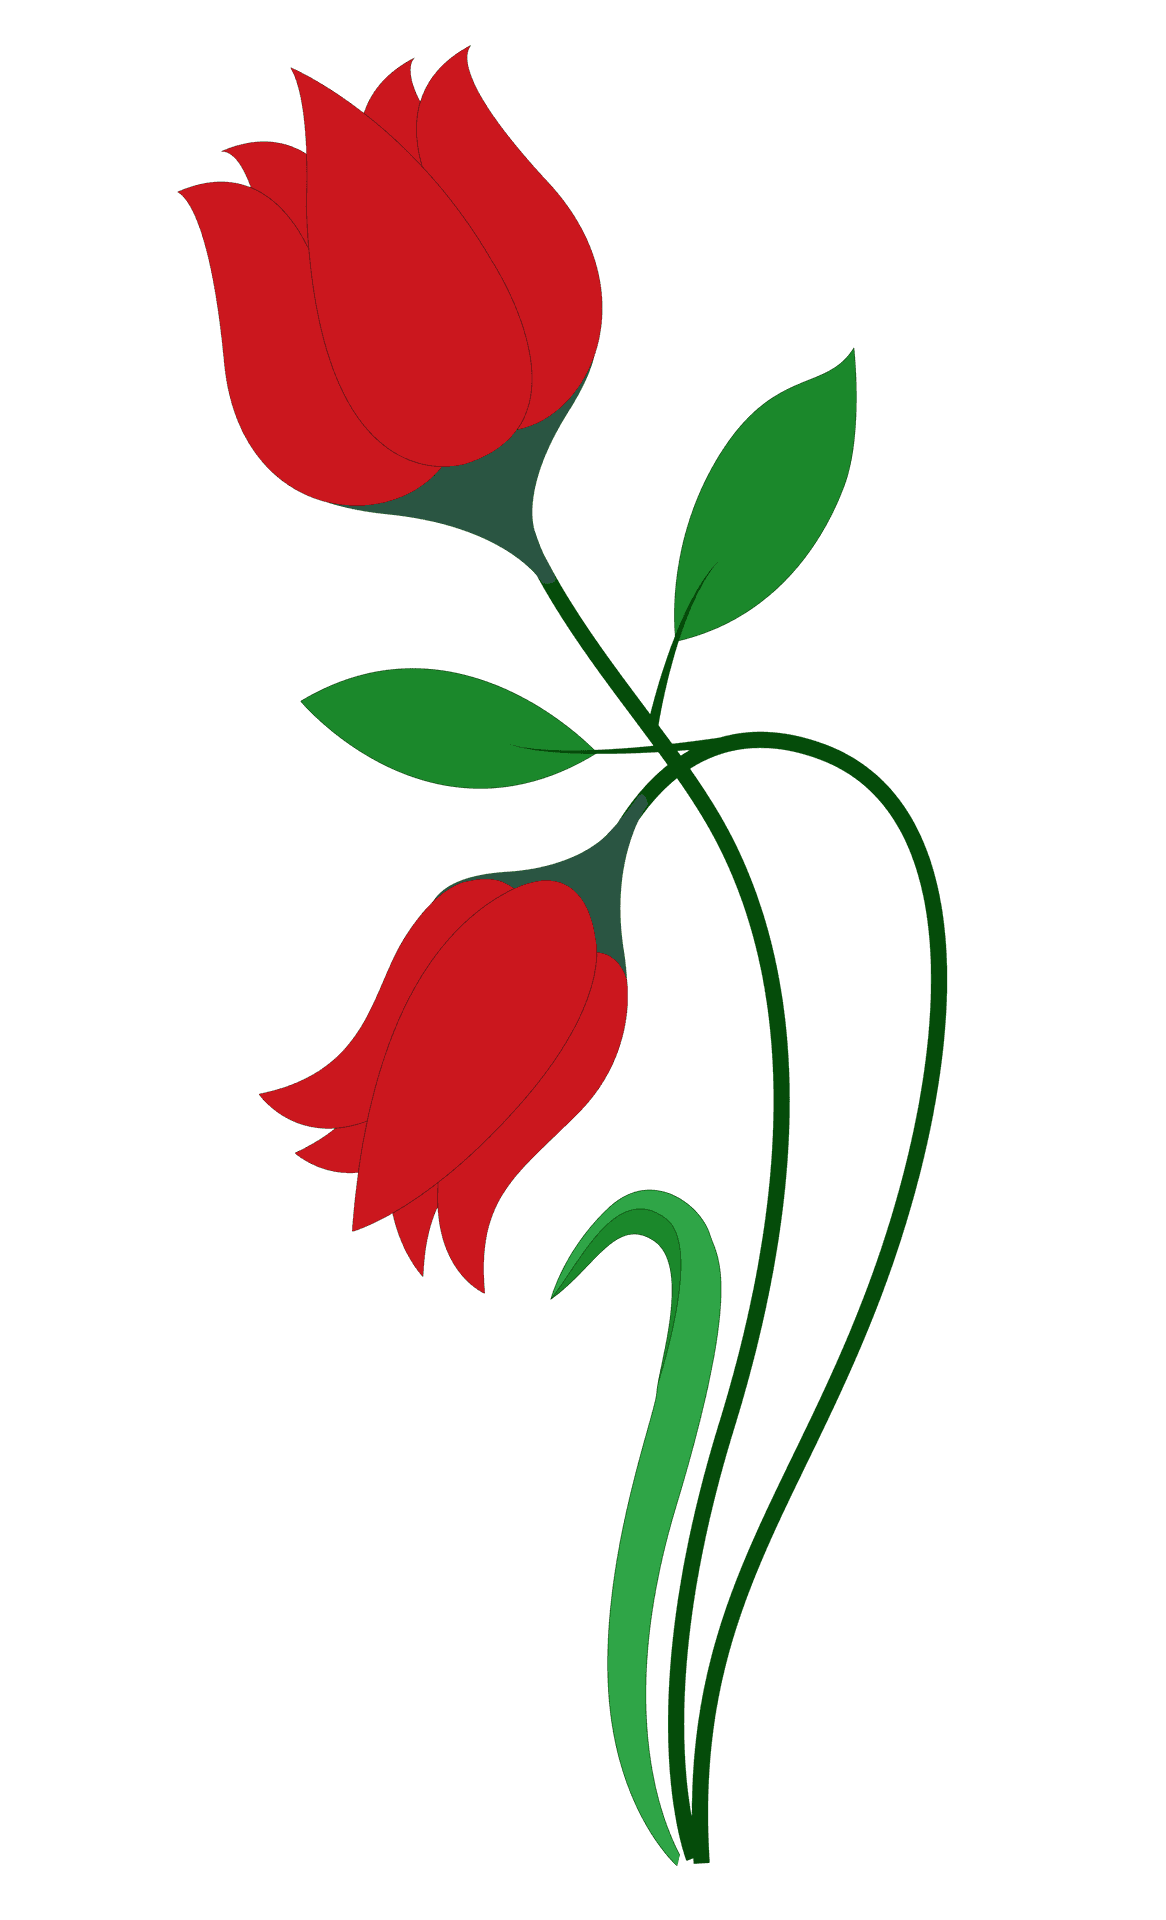 Red Rose Vector Art PNG image